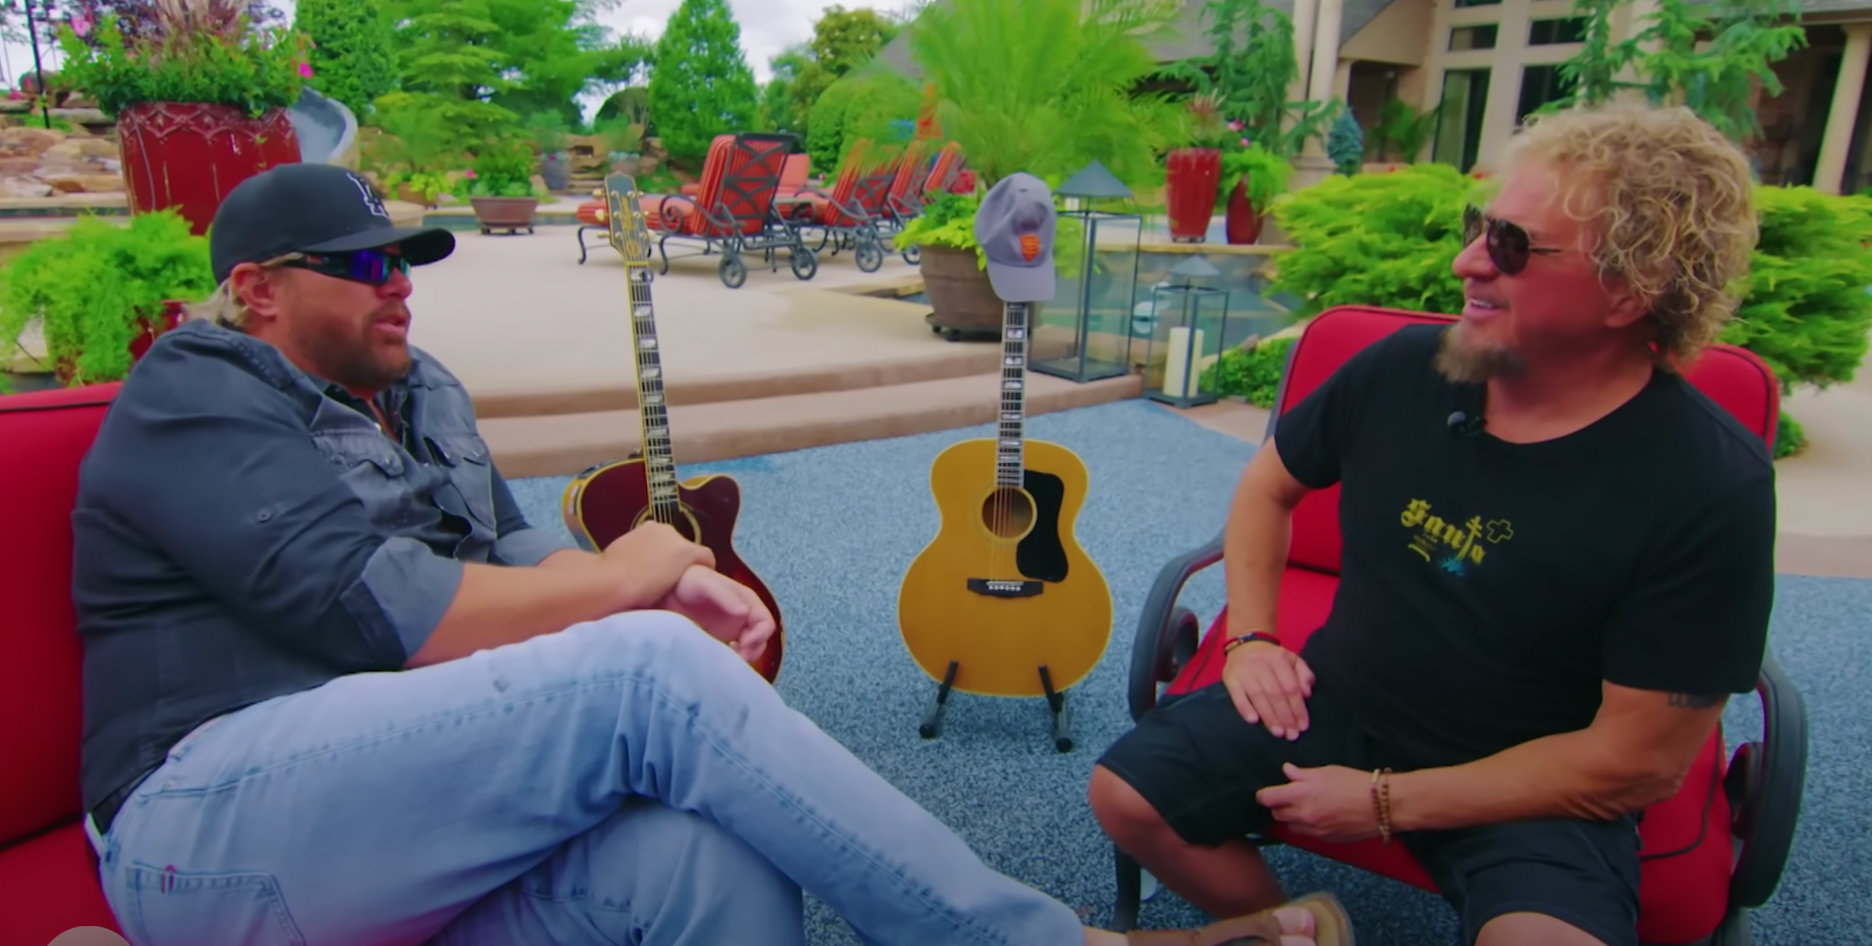 A view of Toby Keith's home in the background | Source: YouTube/AXS TV